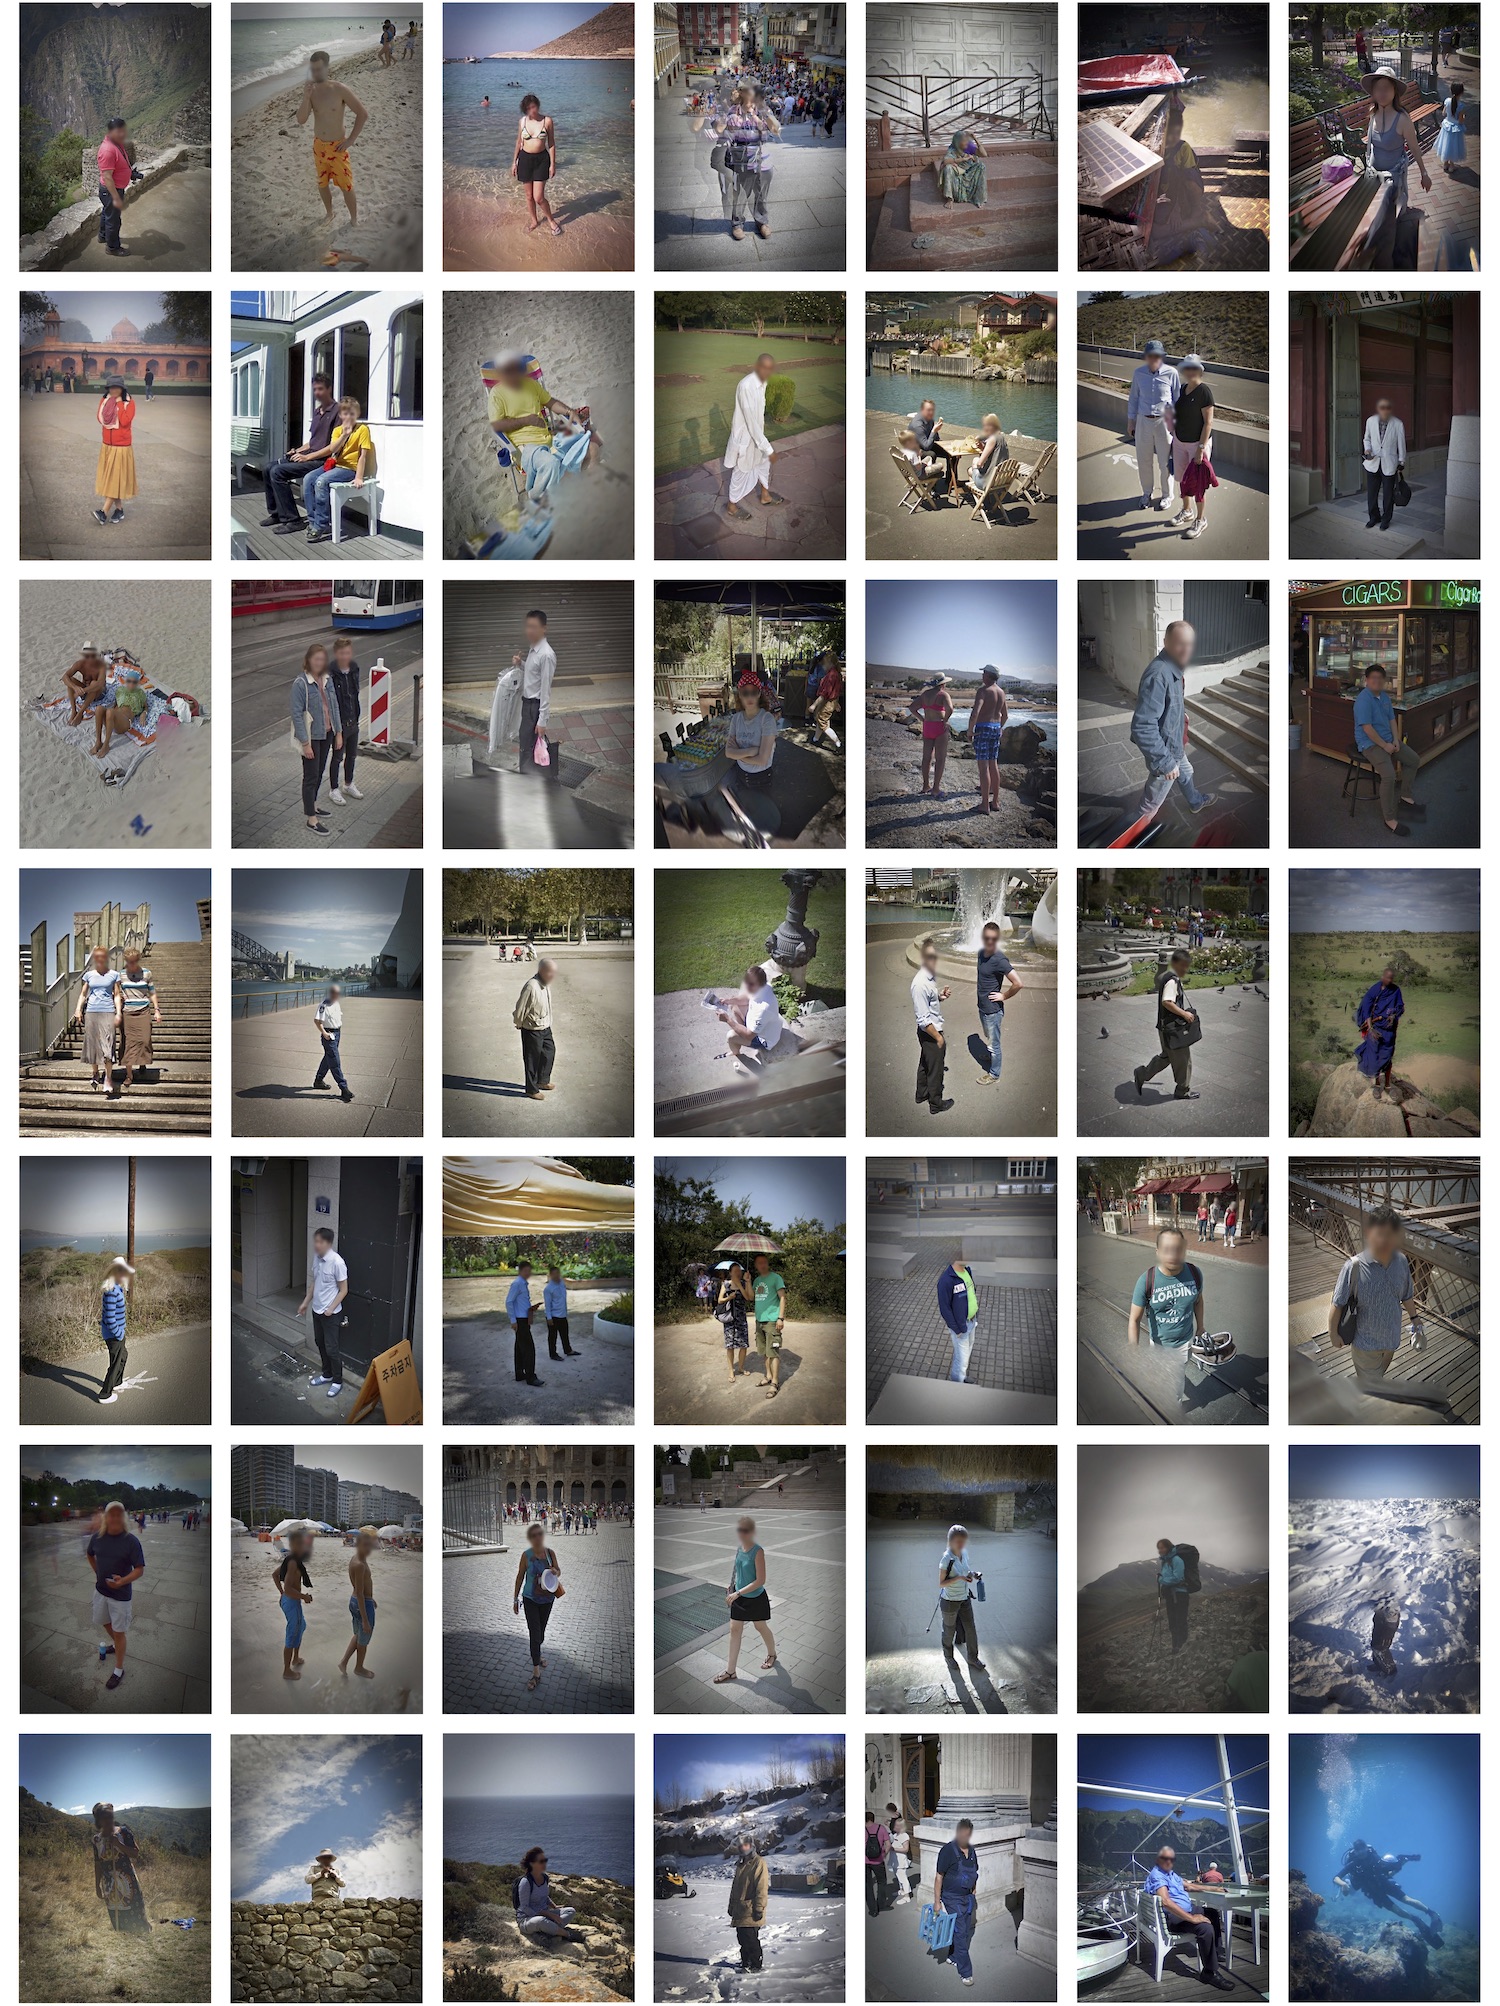 A grid of photos of people from Google Street View.